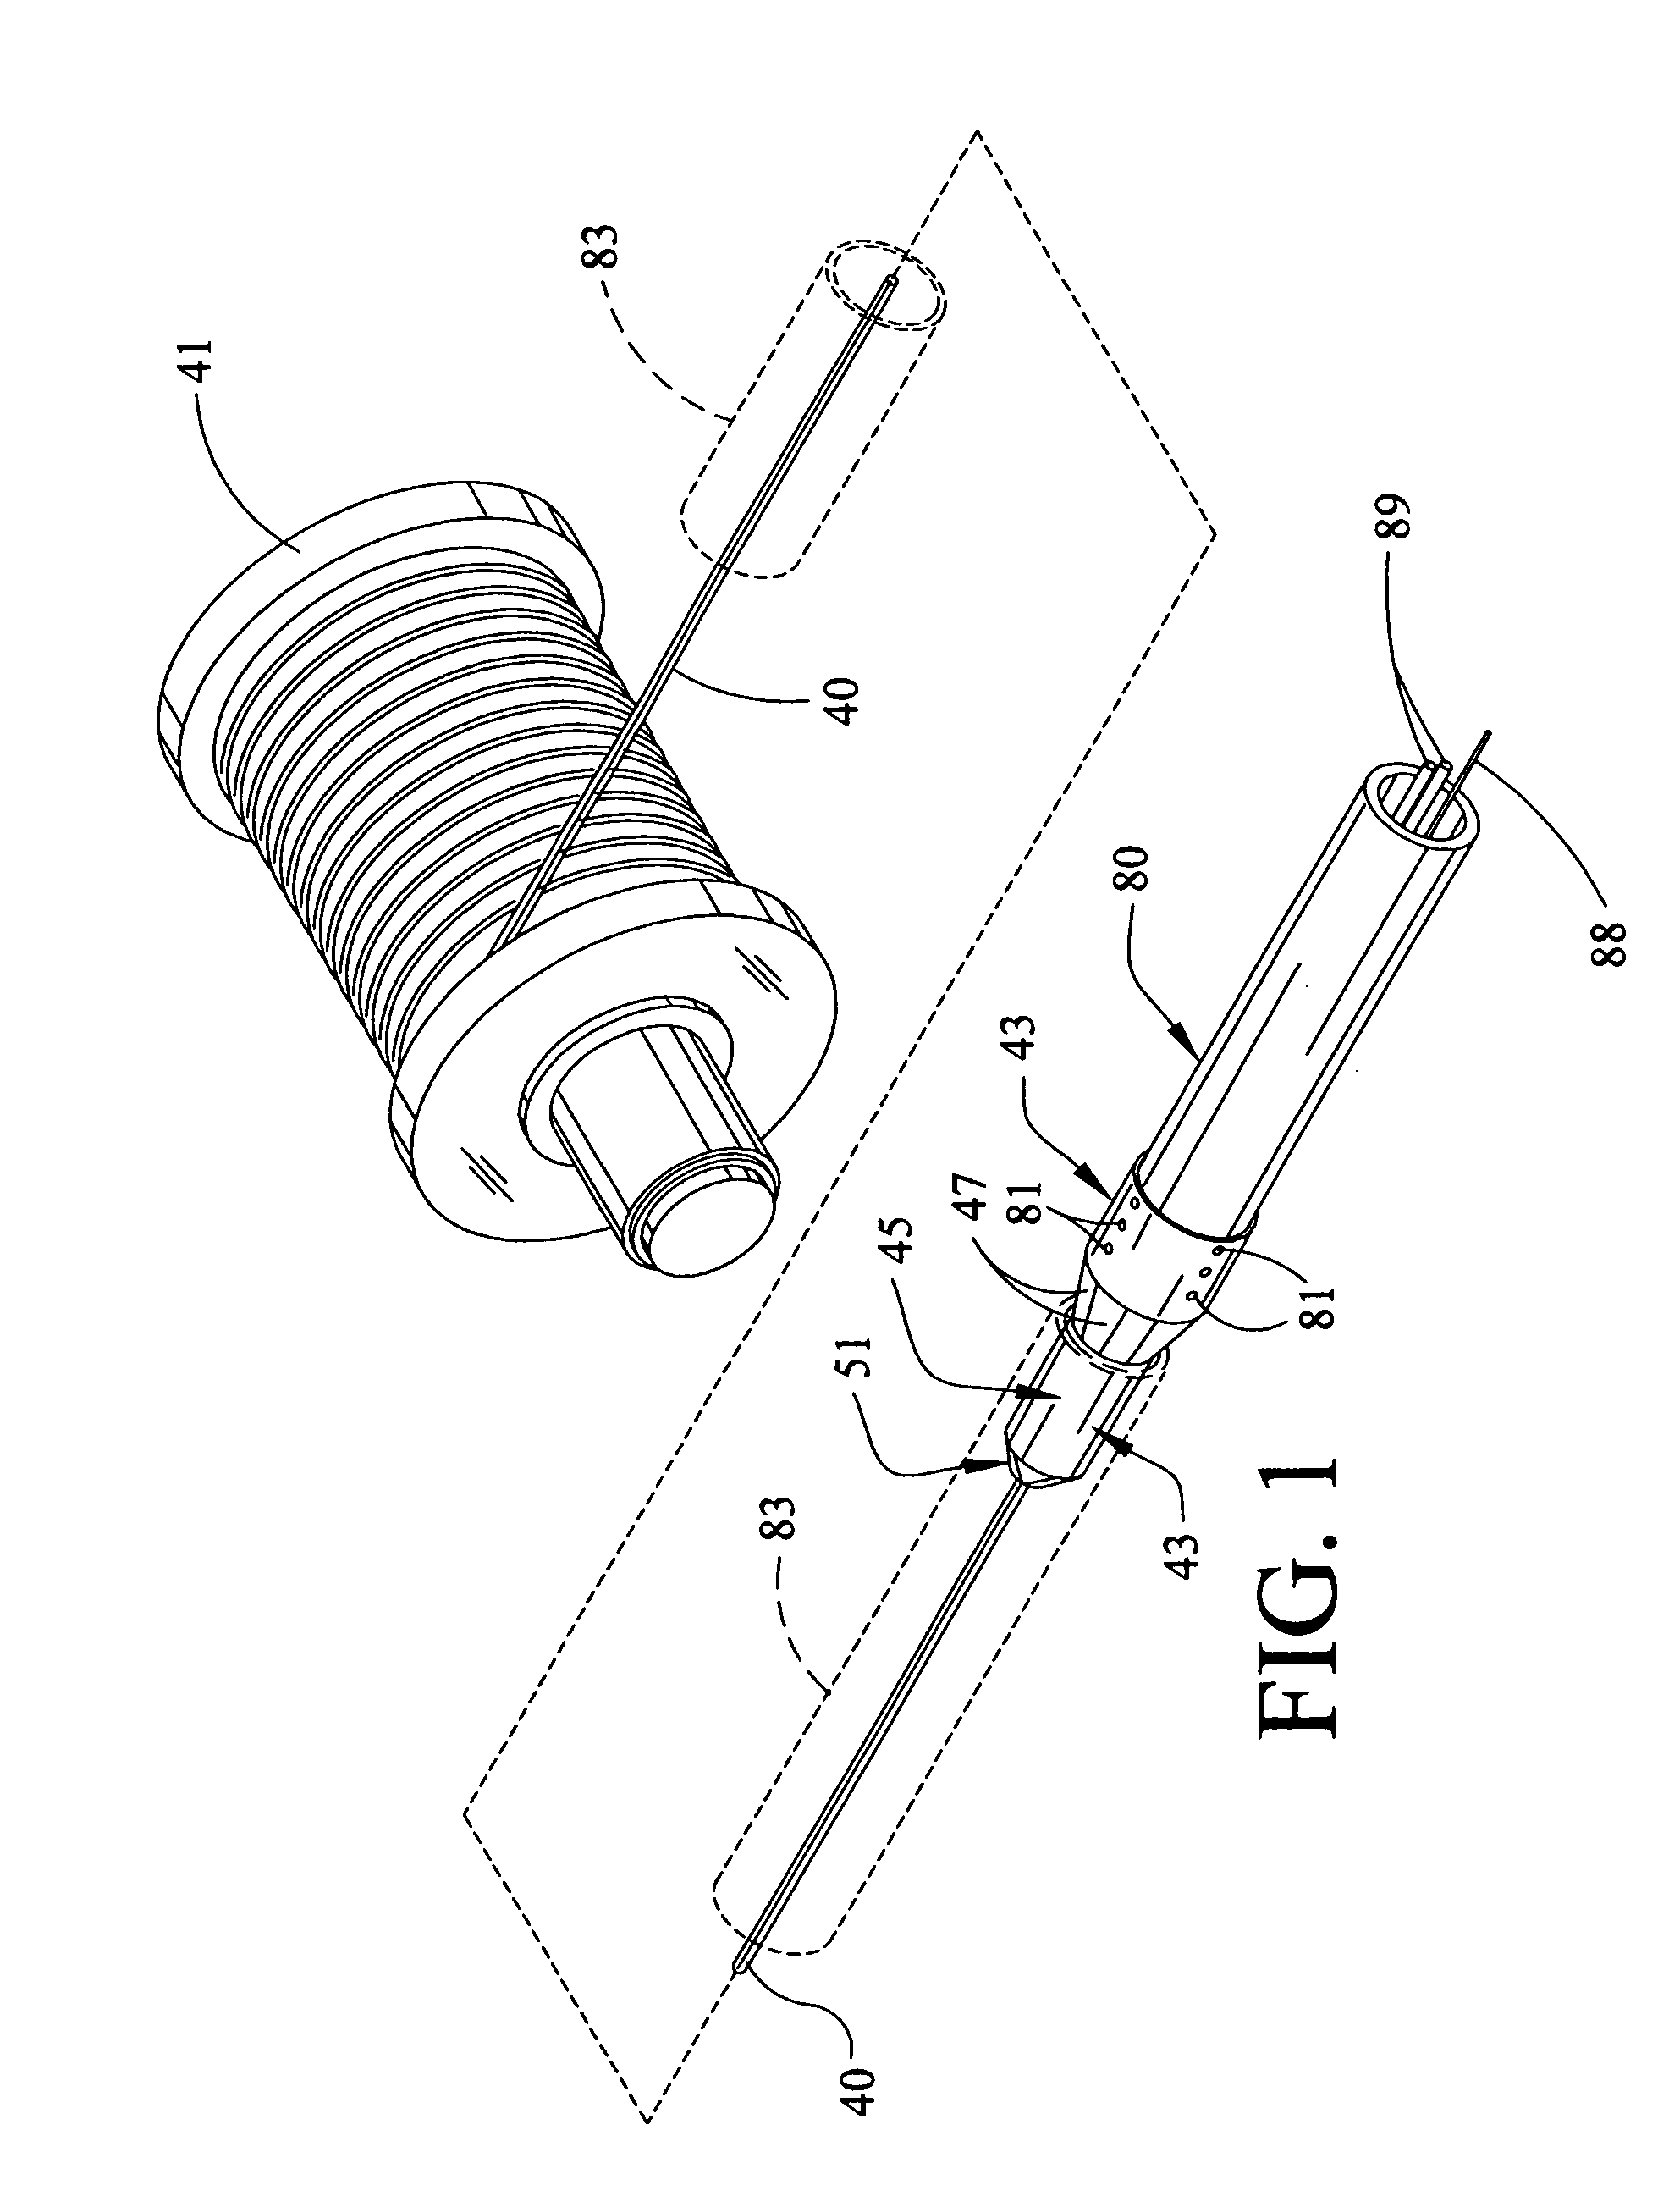 Stored energy coupling and pipe bursting apparatus